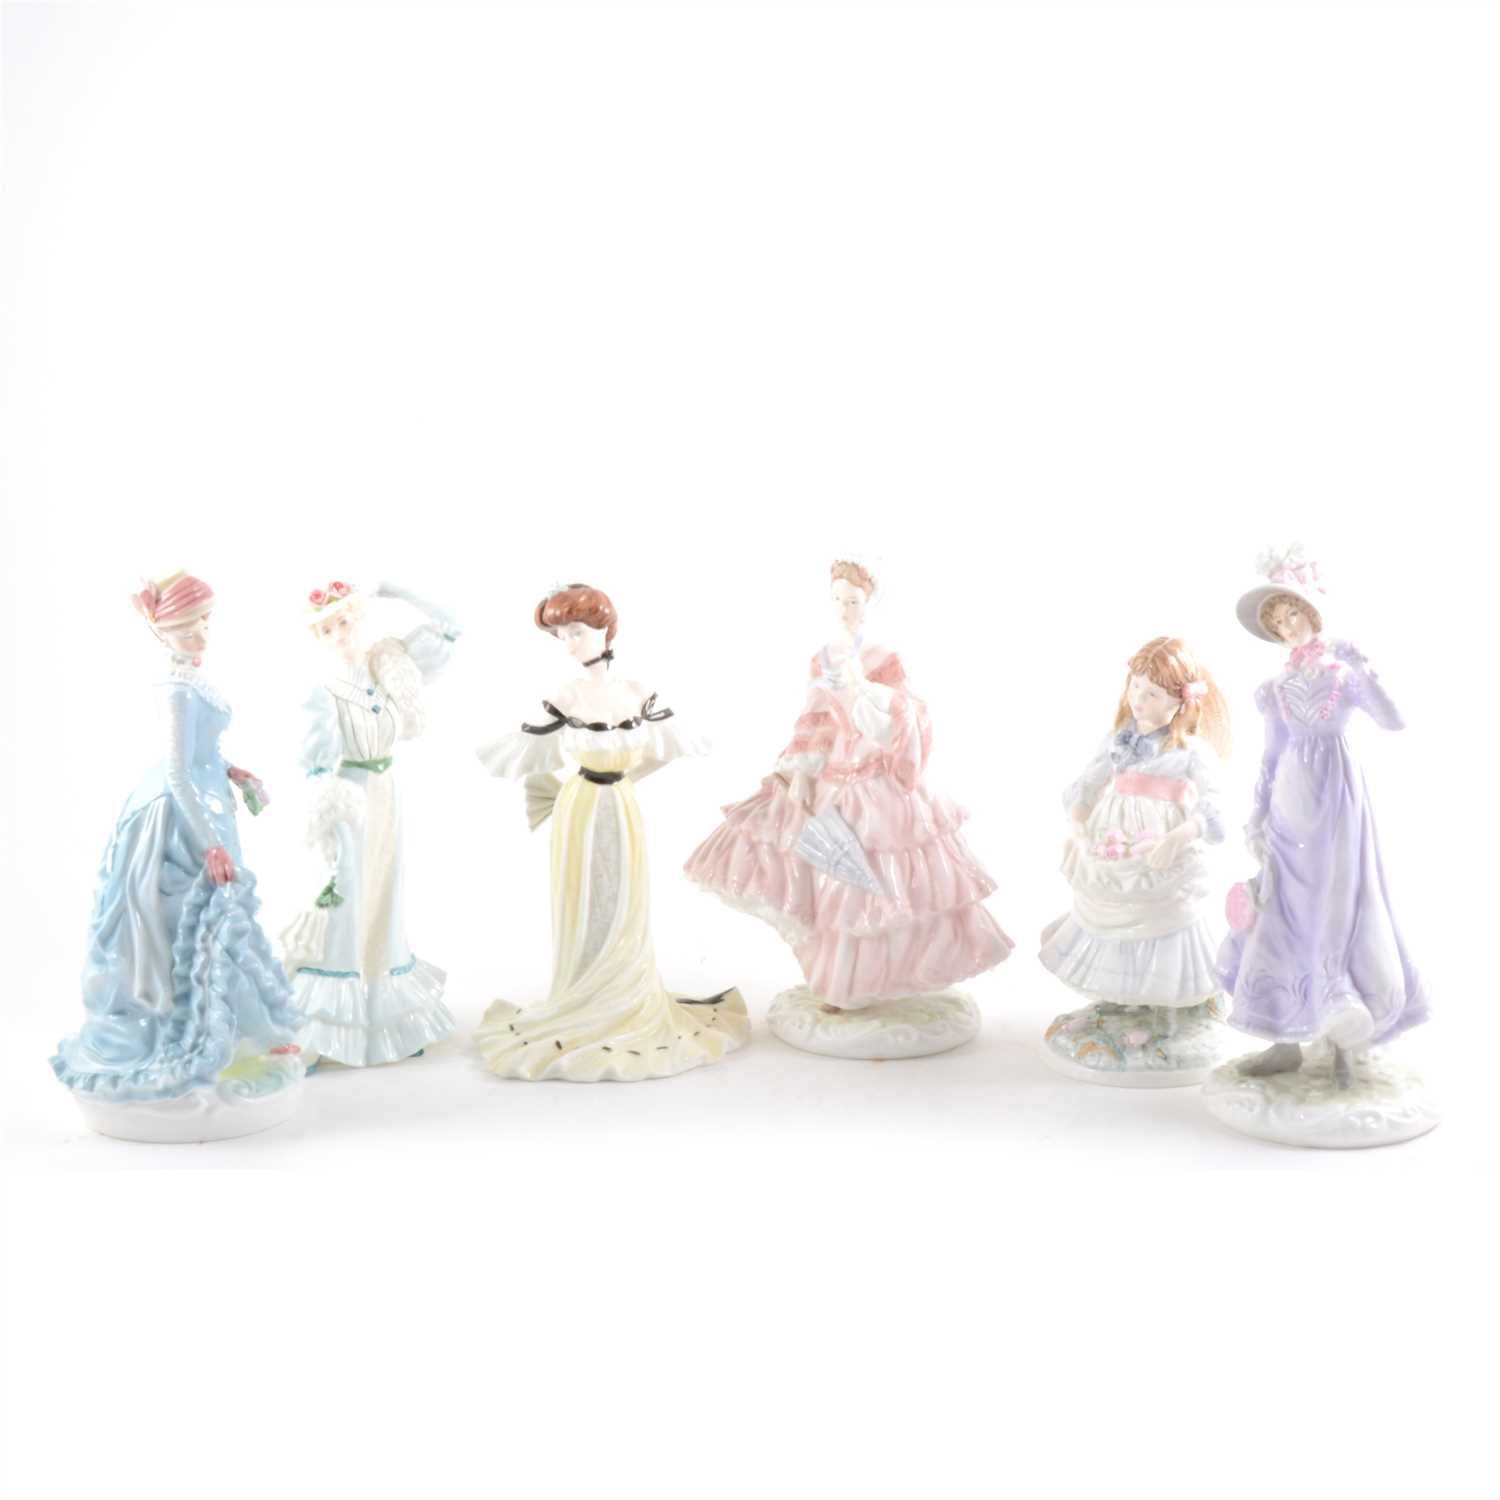 Lot 38 - Four Royal Worcester figurines, from the Victoria and Albert Museum Collection, and various others